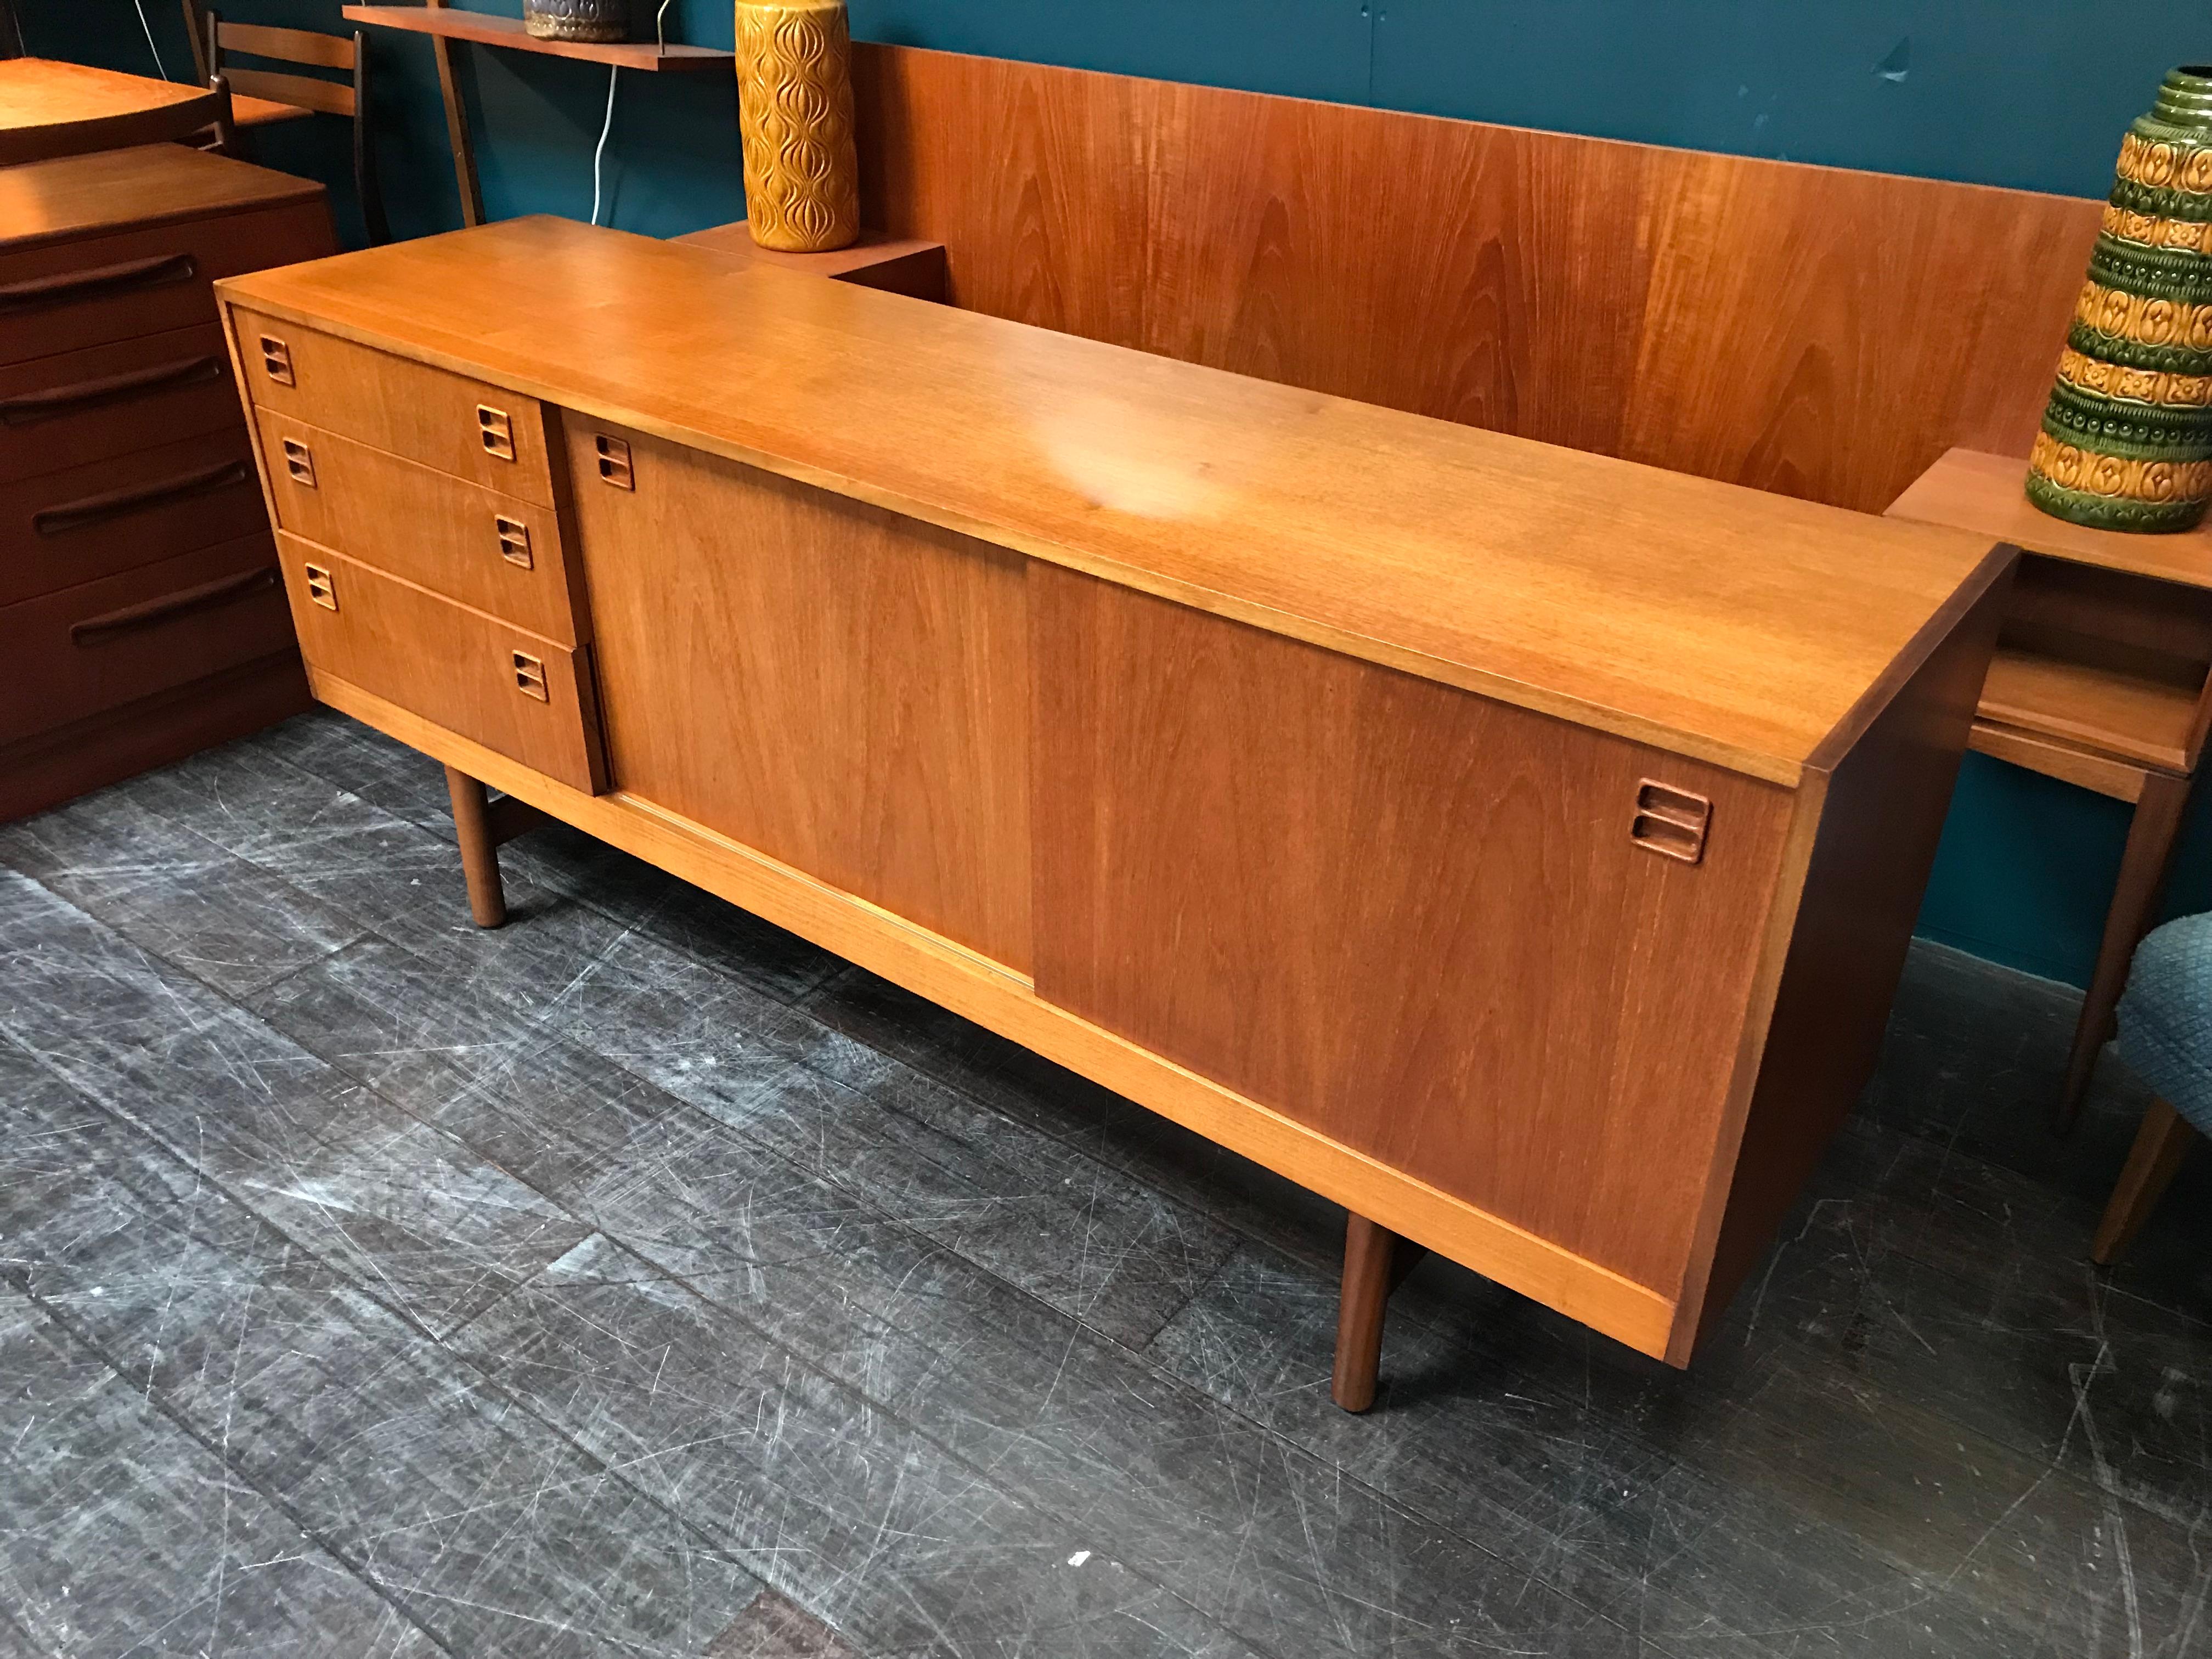 A rare and beautiful vintage midcentury sideboard by iconic Scottish furniture maker Beithcraft. With those desirable sliding doors this is such an elegant piece of furniture. Three drawers sit to the left of the cupboard doors, the top one with